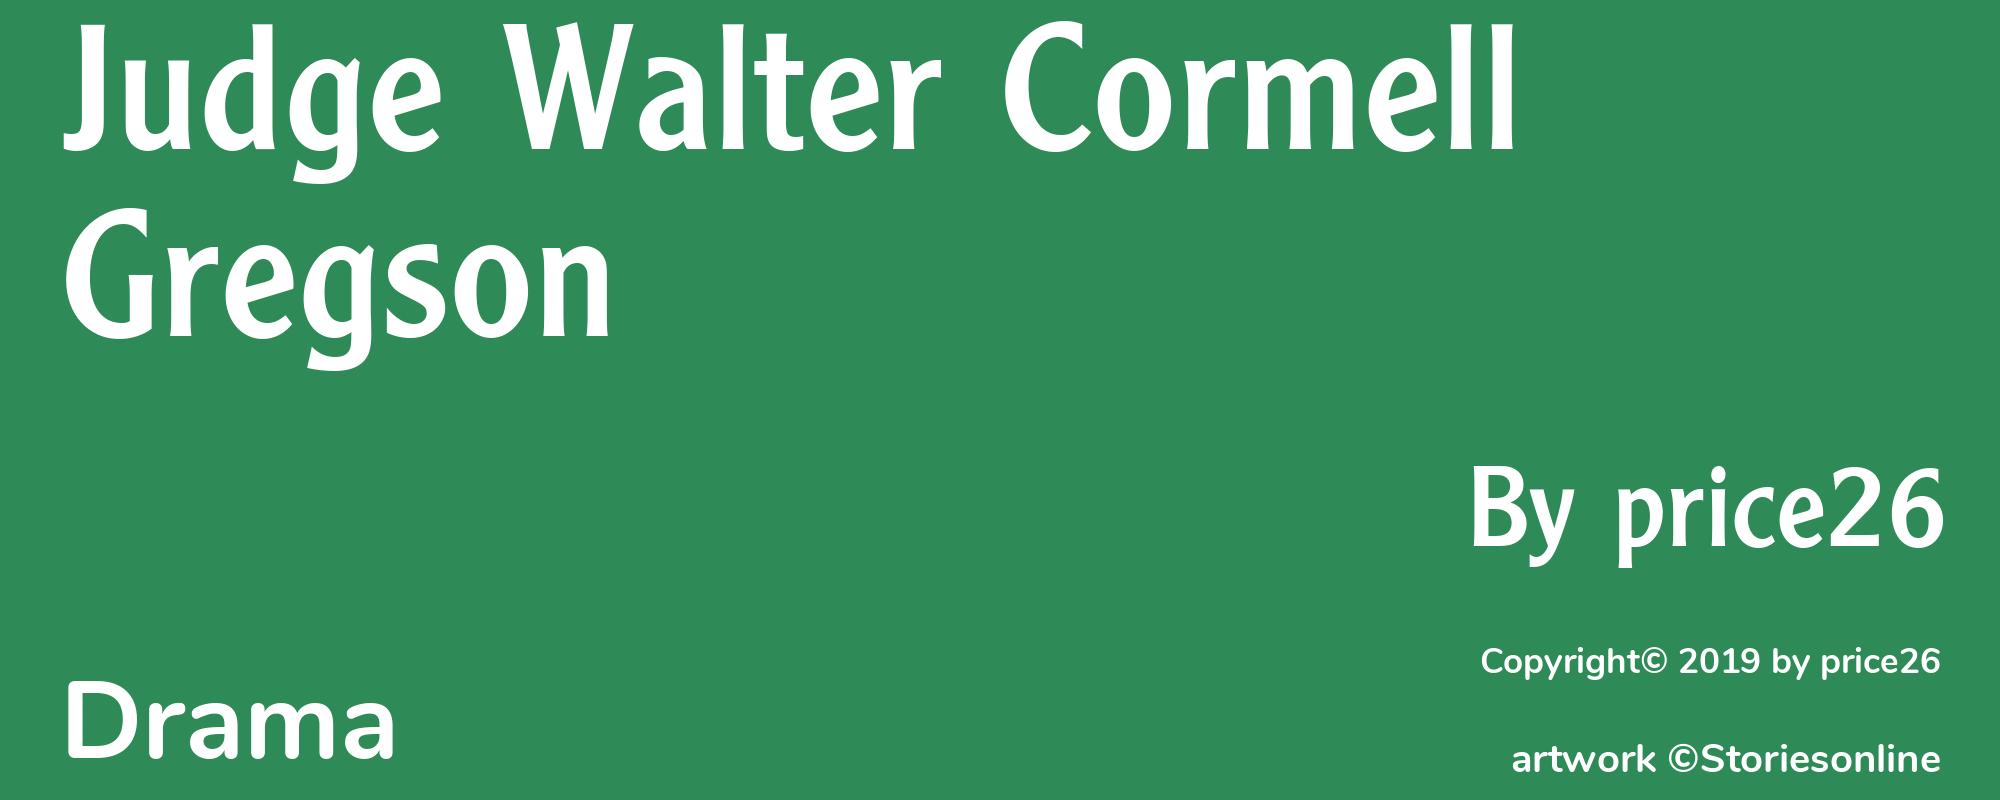 Judge Walter Cormell Gregson - Cover